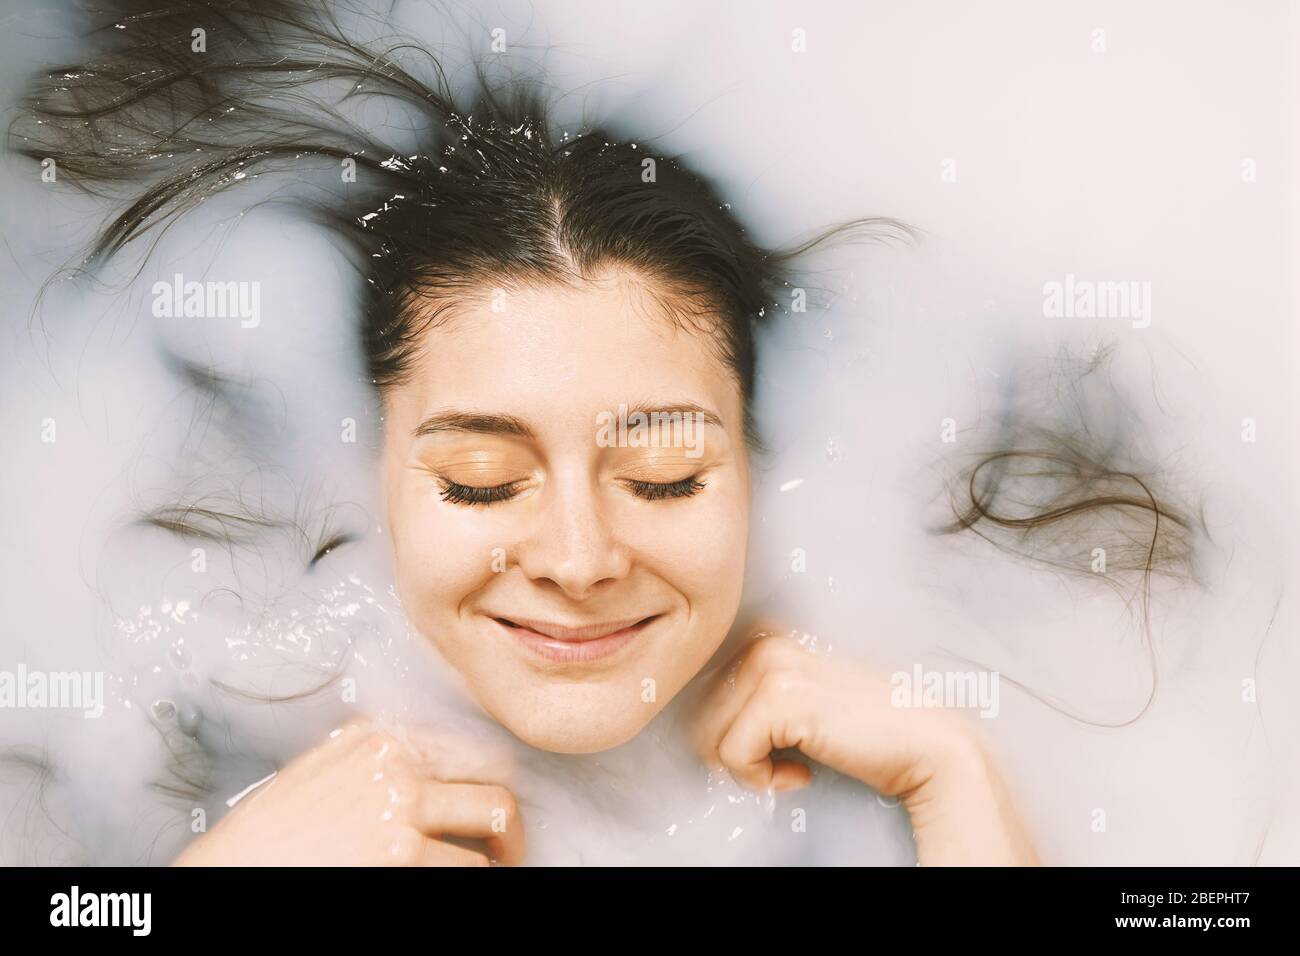 young woman taking a bath in milk - happy with closed eyes - self care and wellbeing concept Stock Photo